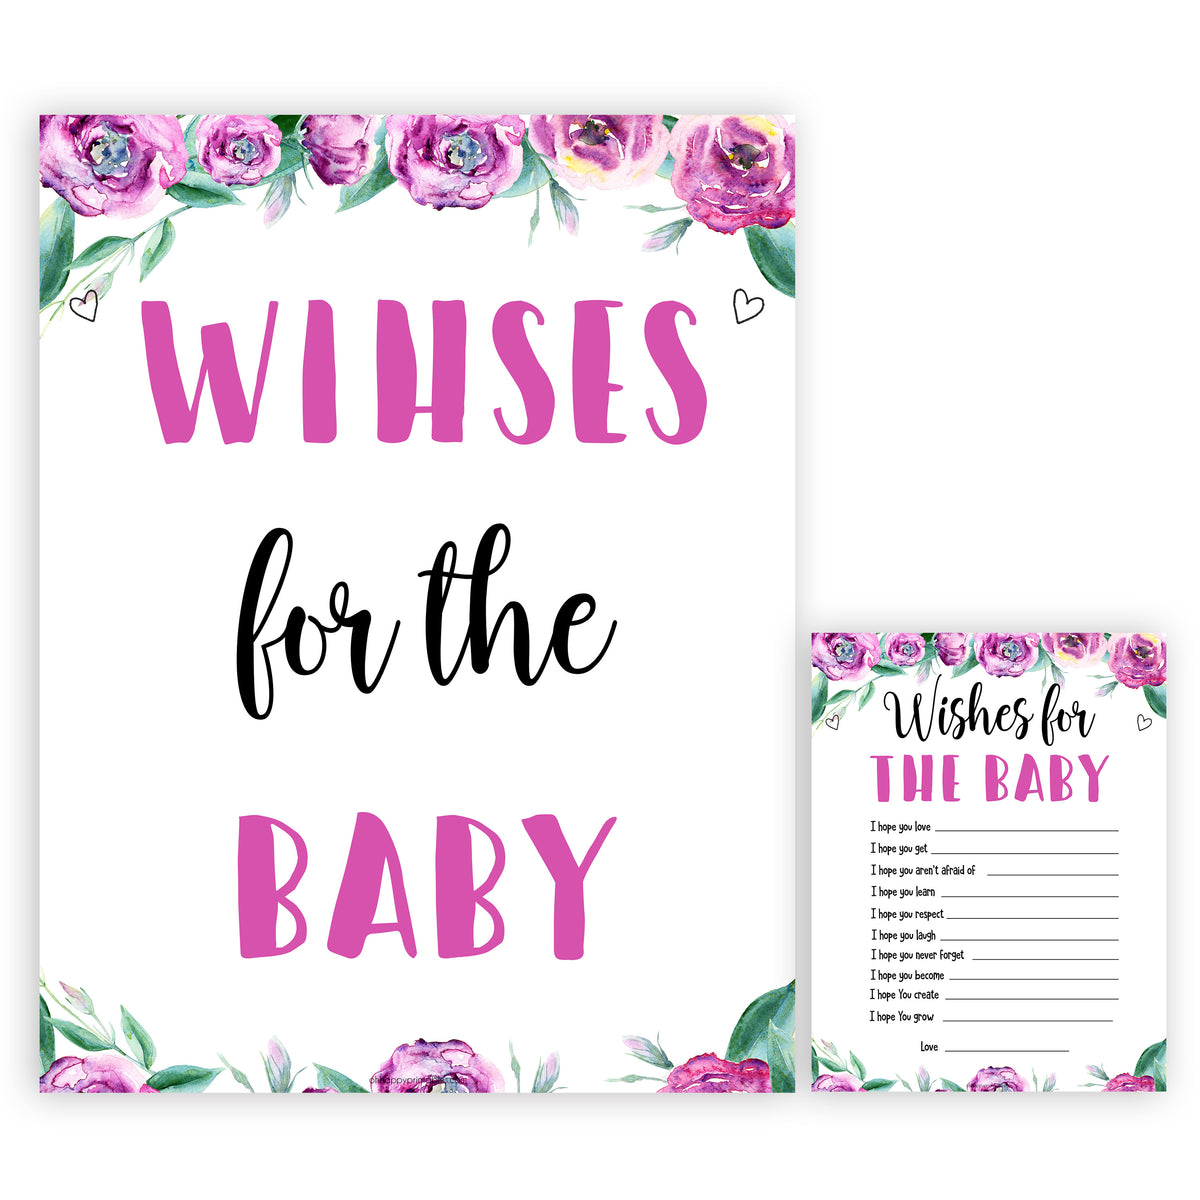 Purple peonies wishes for the baby baby shower games, printable baby shower games, fun baby shower games, baby shower games, popular baby shower games, floral baby shower games, purple baby shower themes